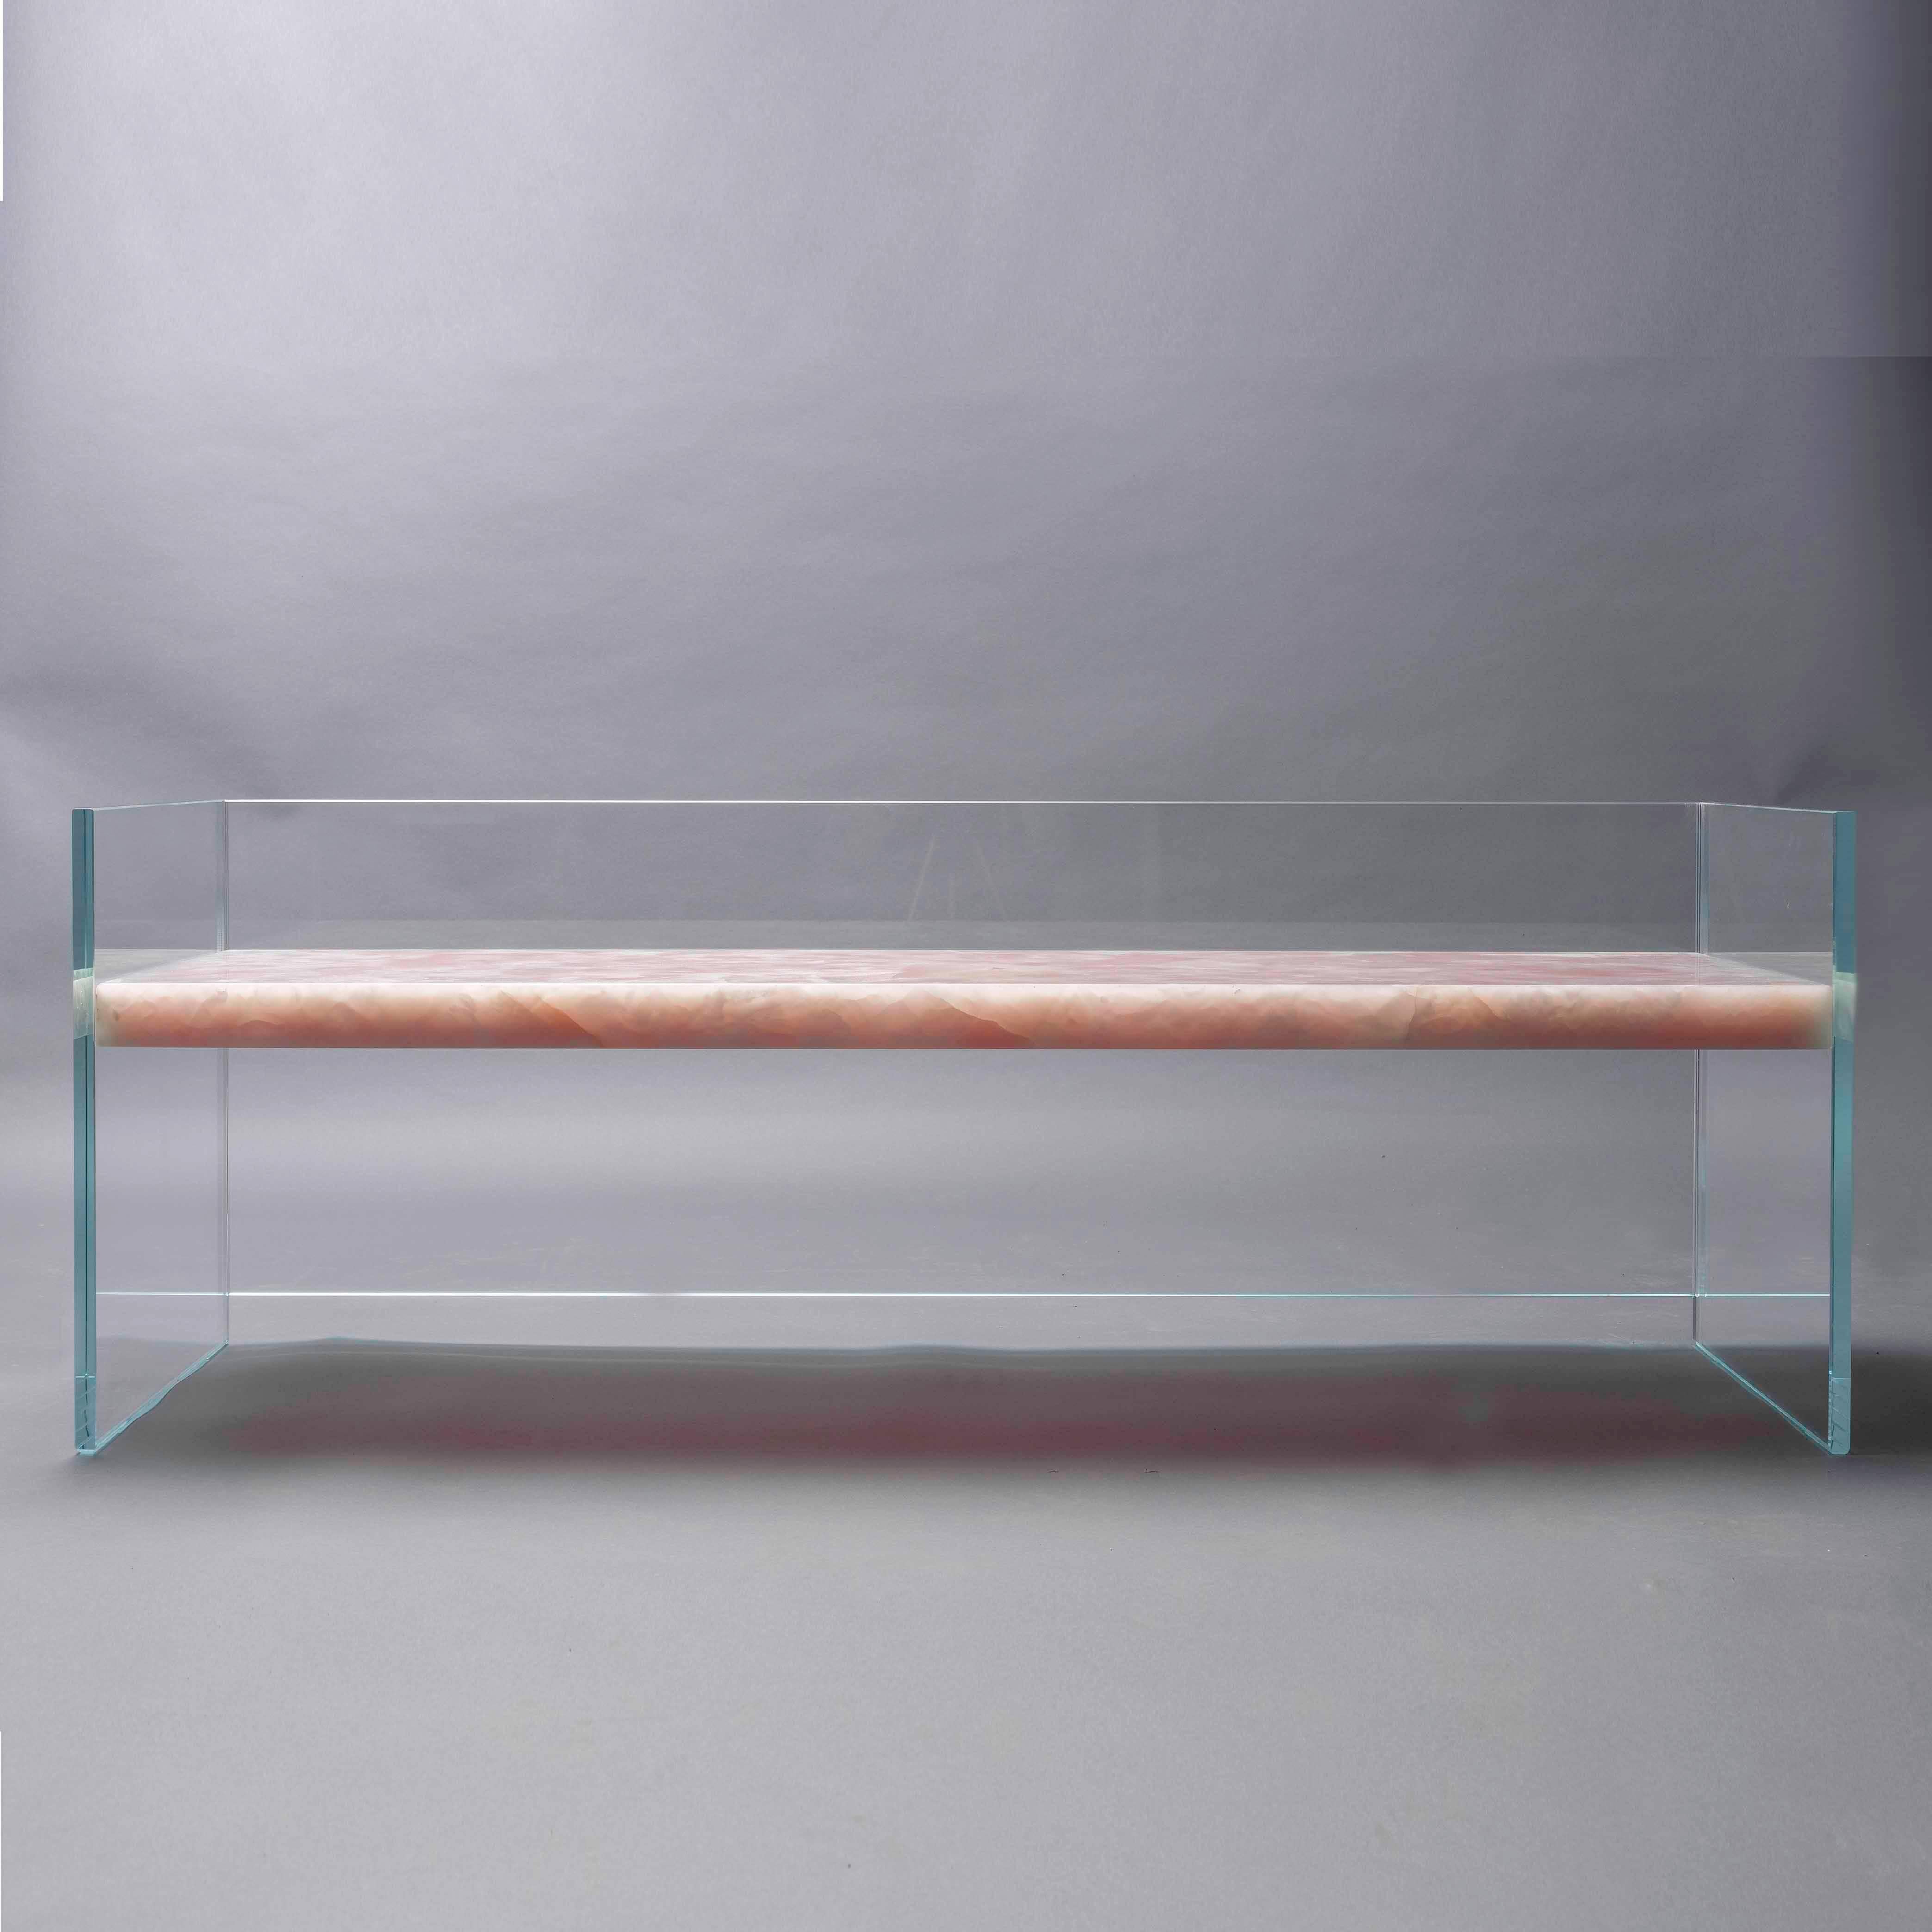 Sculptural bench made of ultra-clear glass and rose onyx.

Claste drew inspiration from the juxtaposition of stability and fragility to create this series of furniture designs. Each work embraces tension rather than reject it, transforming the